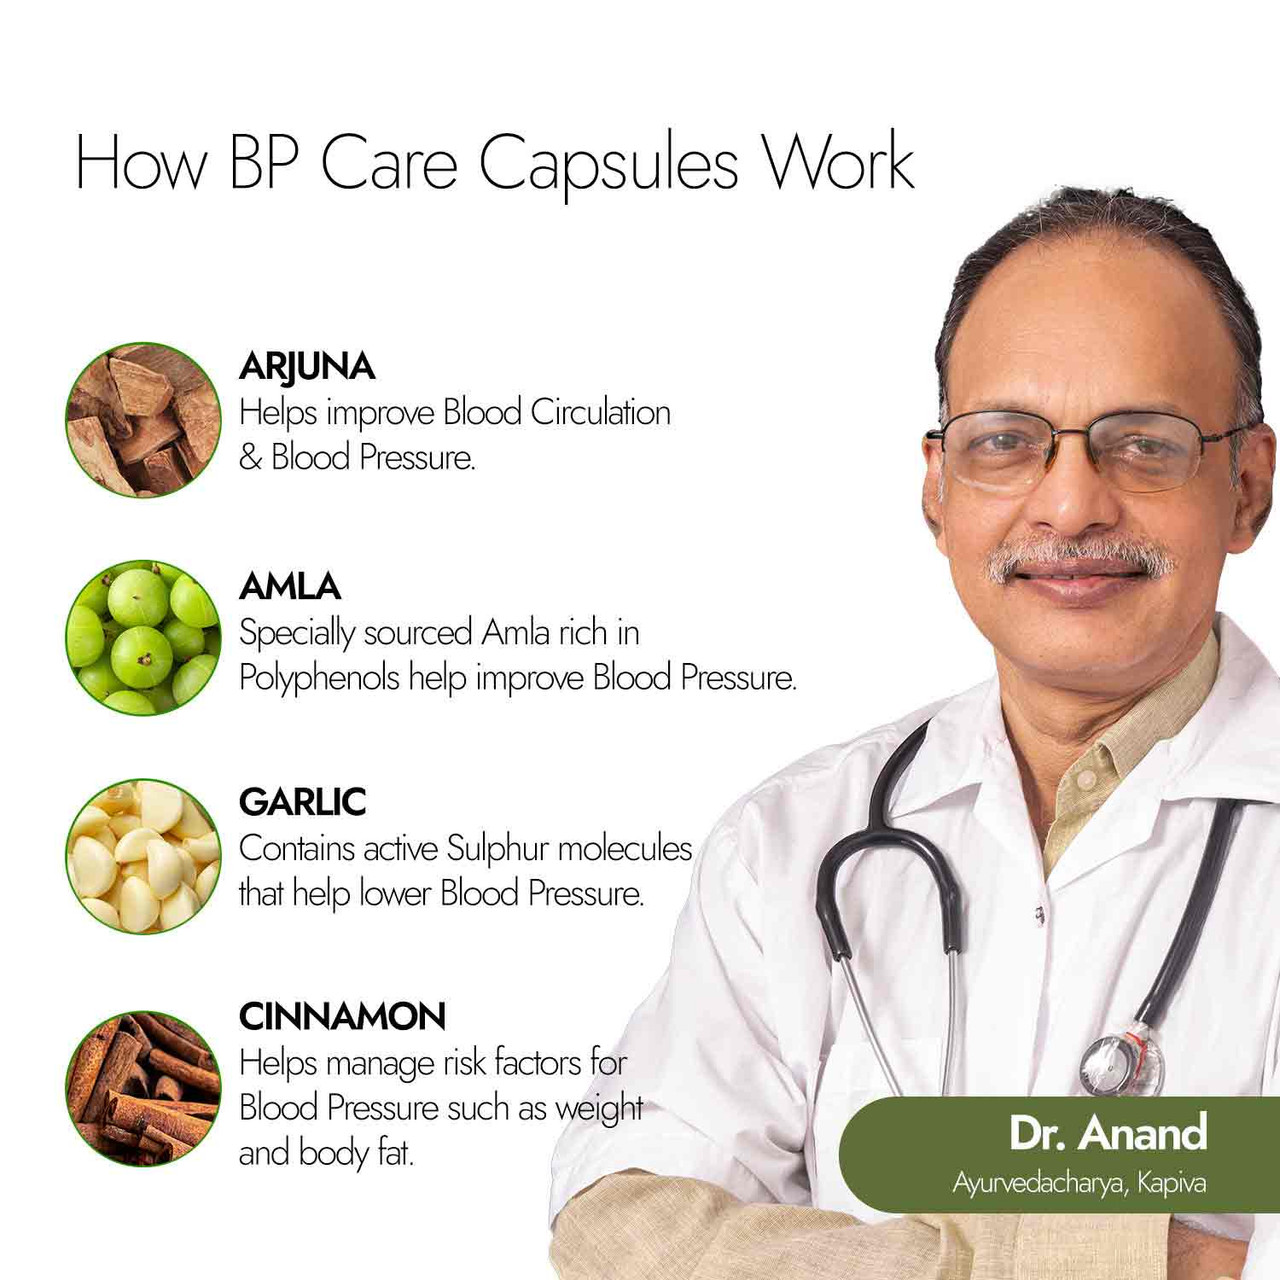 3 month BP care capsules + 3 month services